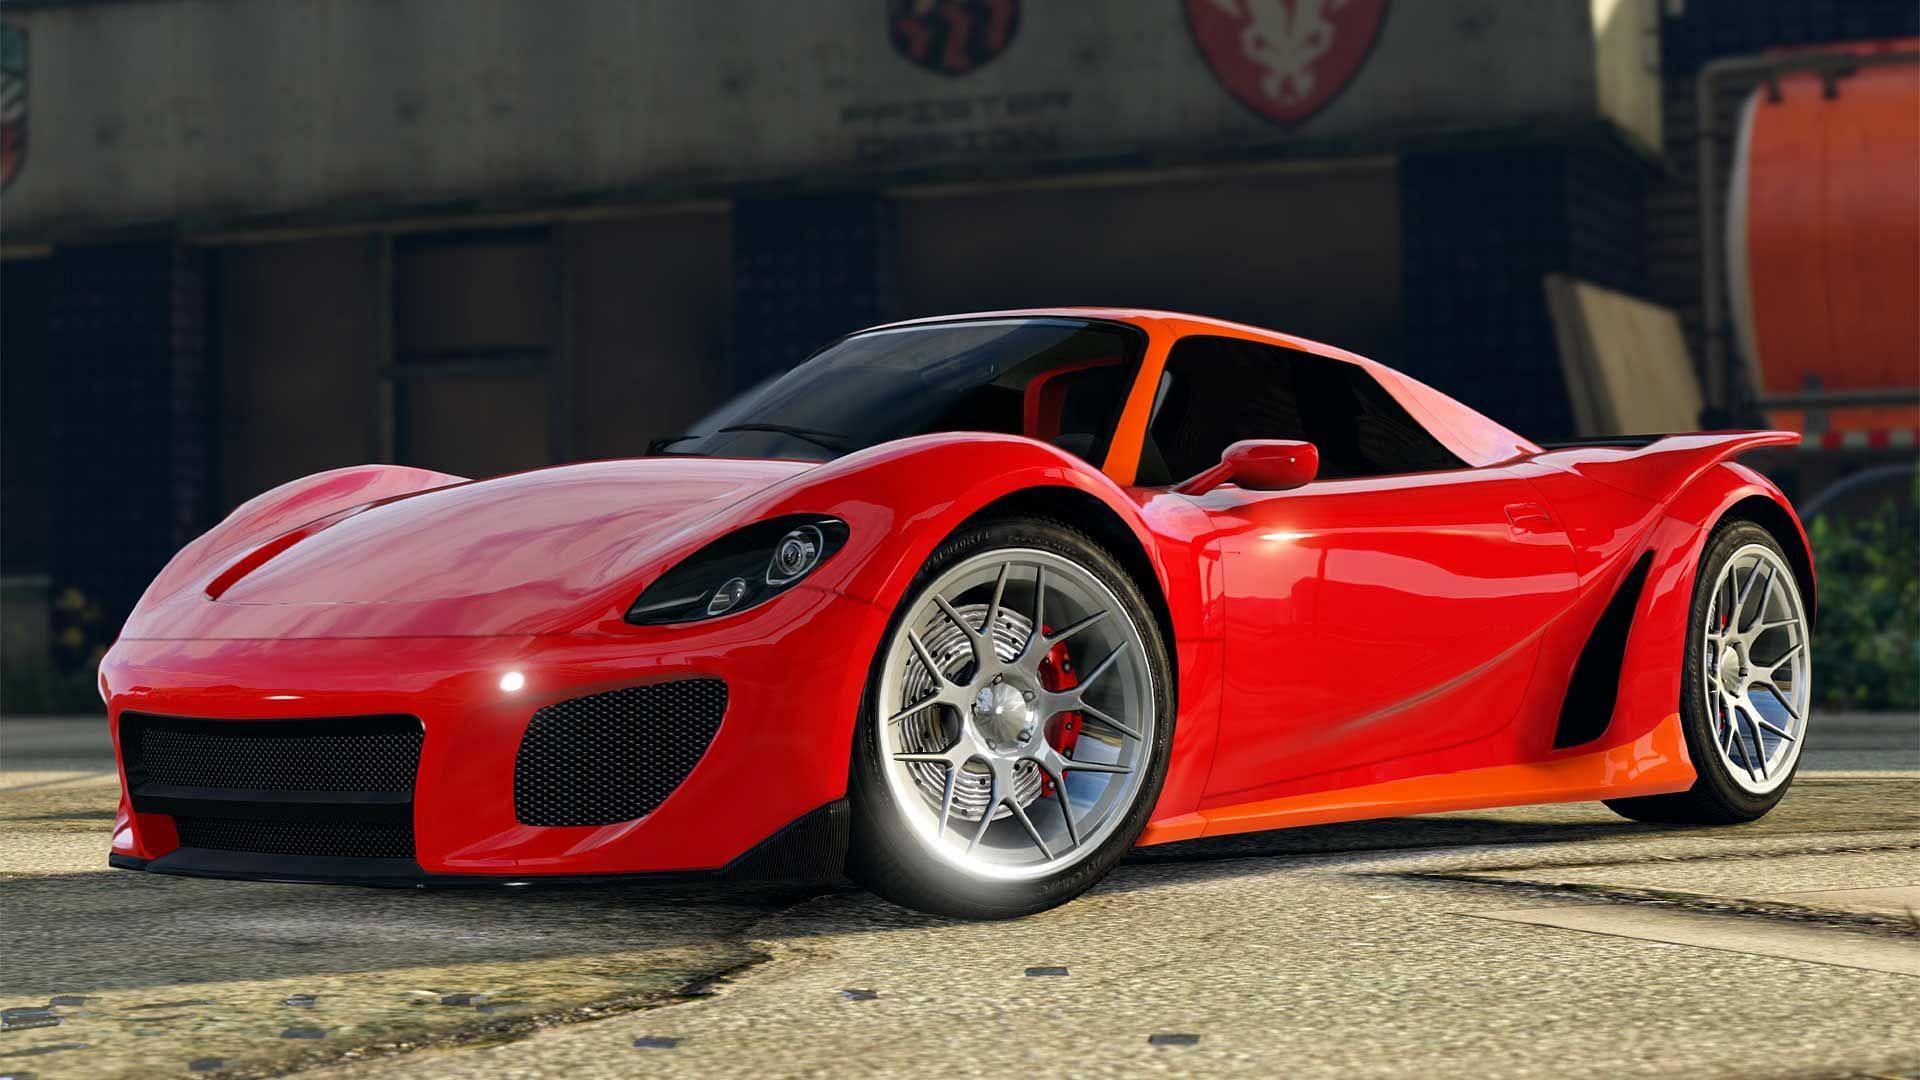 Why Weaponized Ignus is the fastest HSW car in GTA Online after Last Dose  update